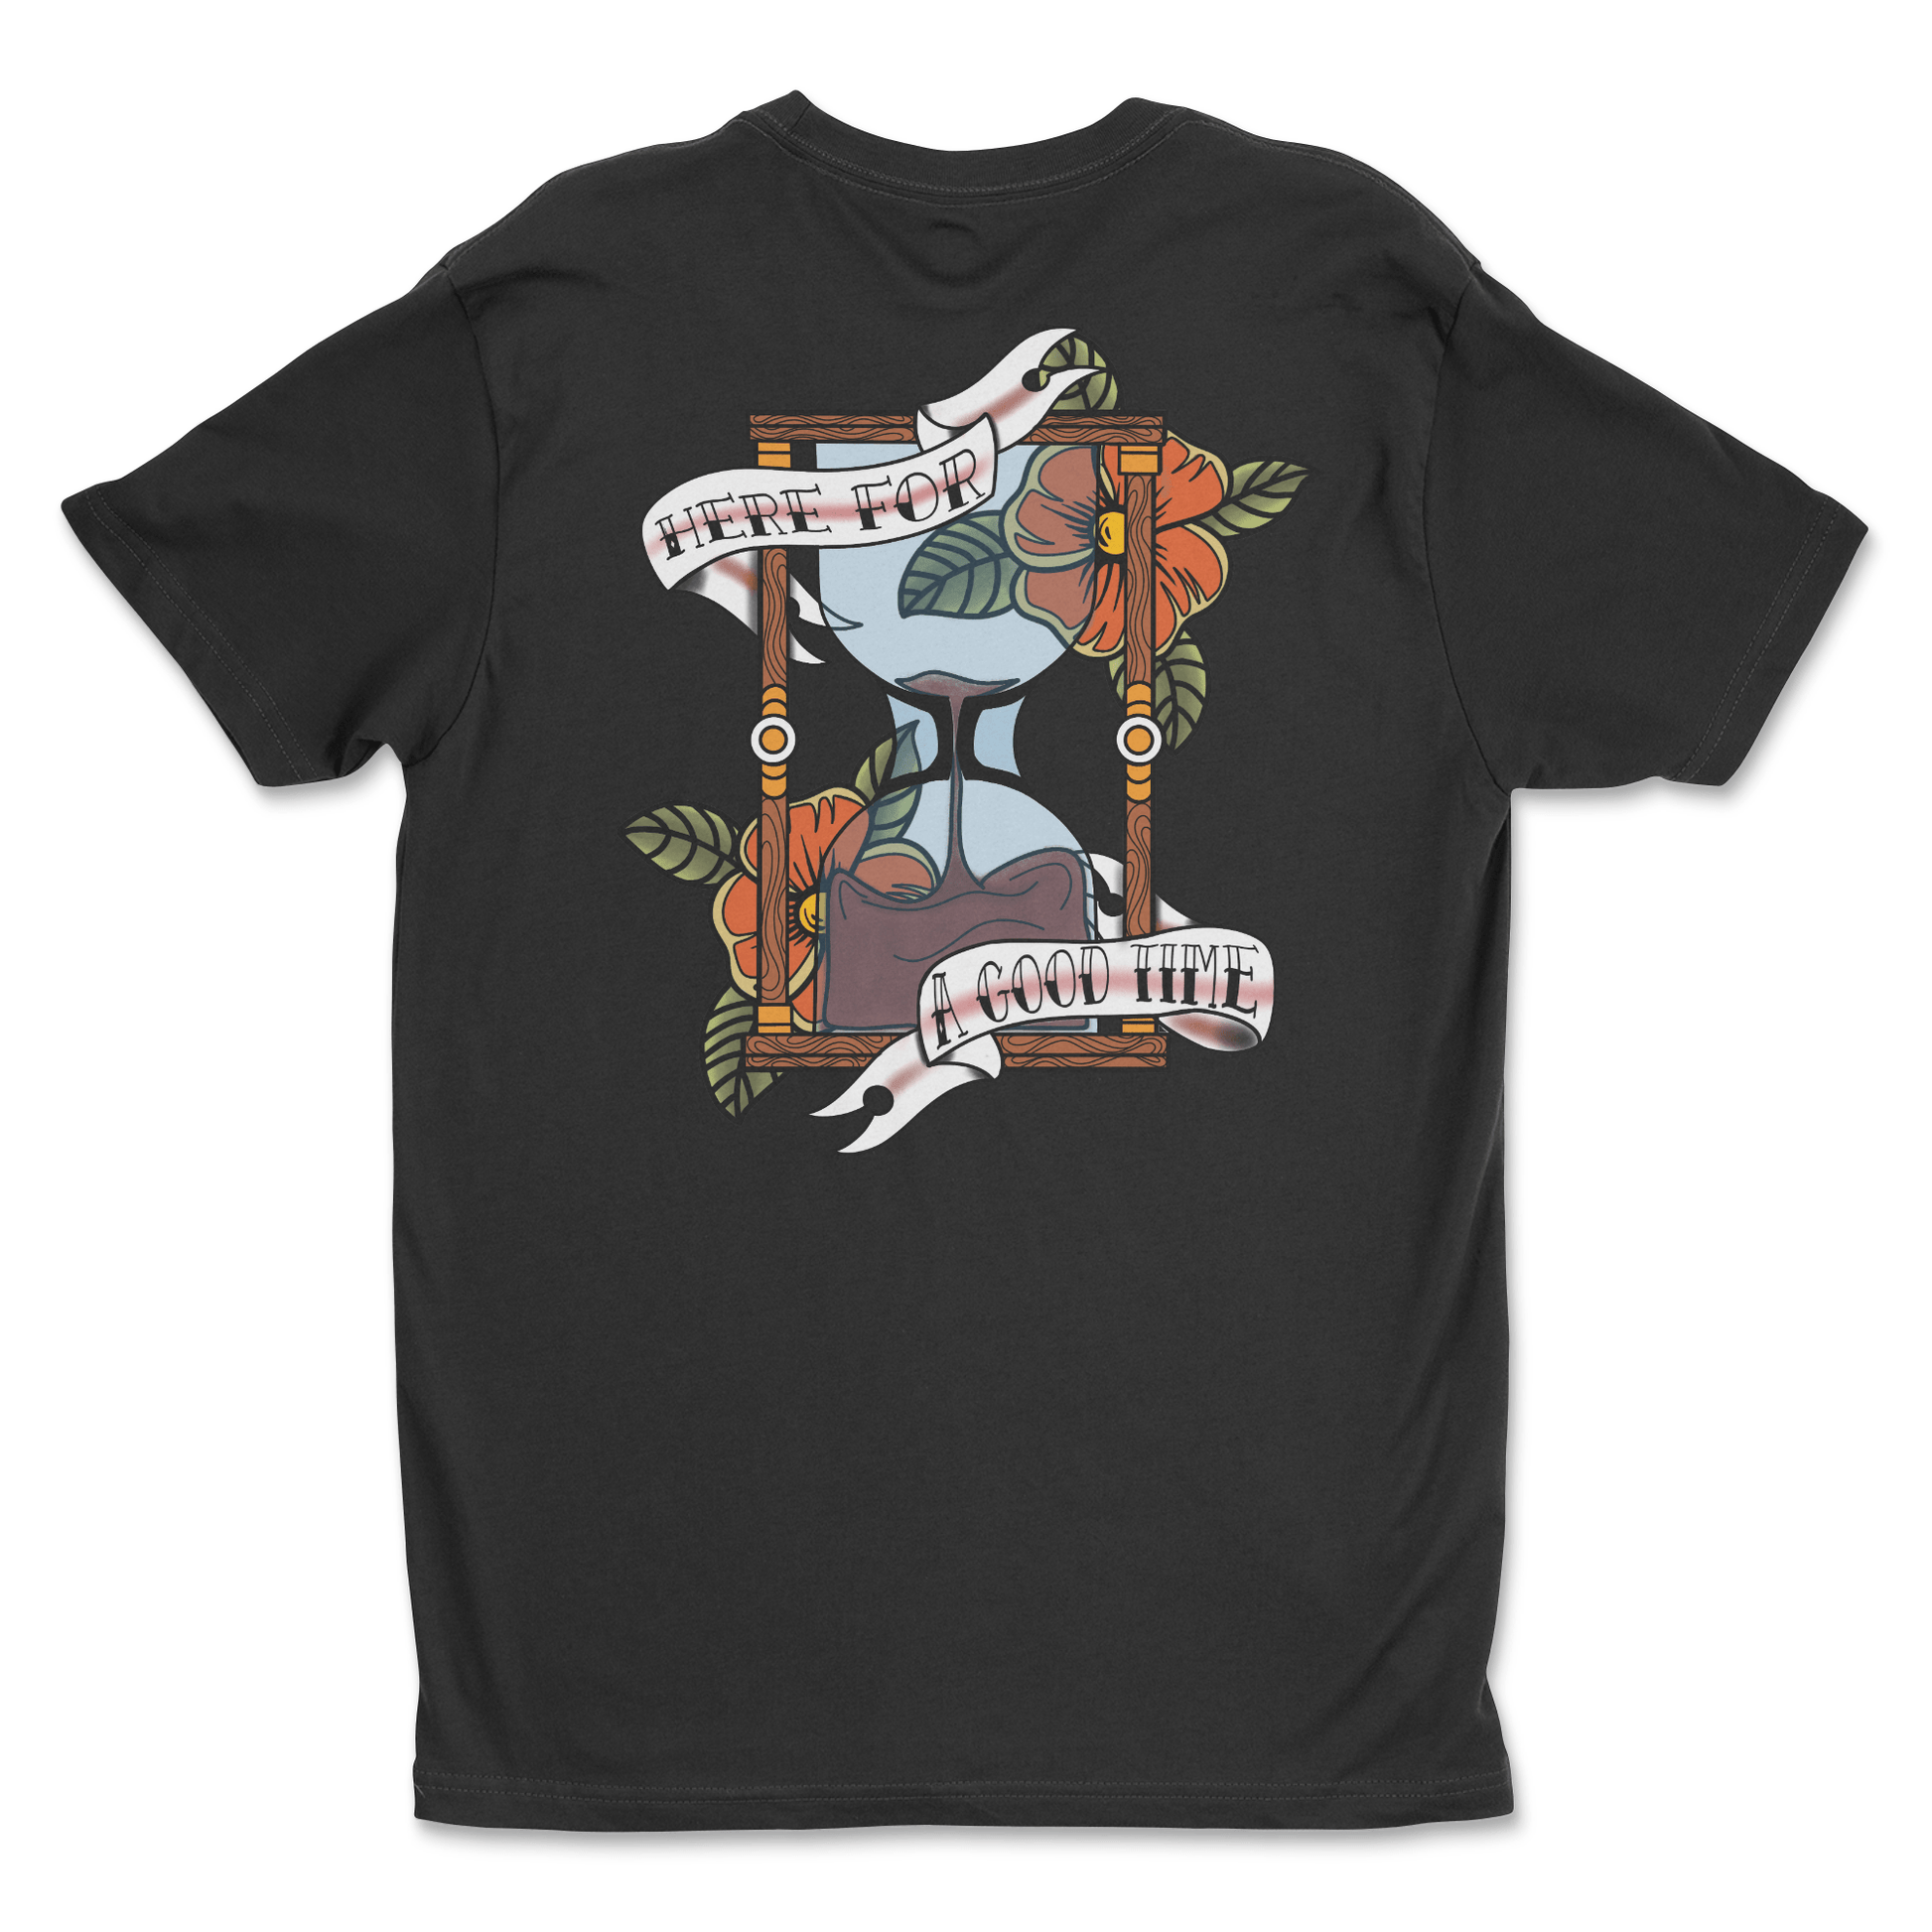 Legendary ltd. Here for a Good Time Tee by Tim Dalton